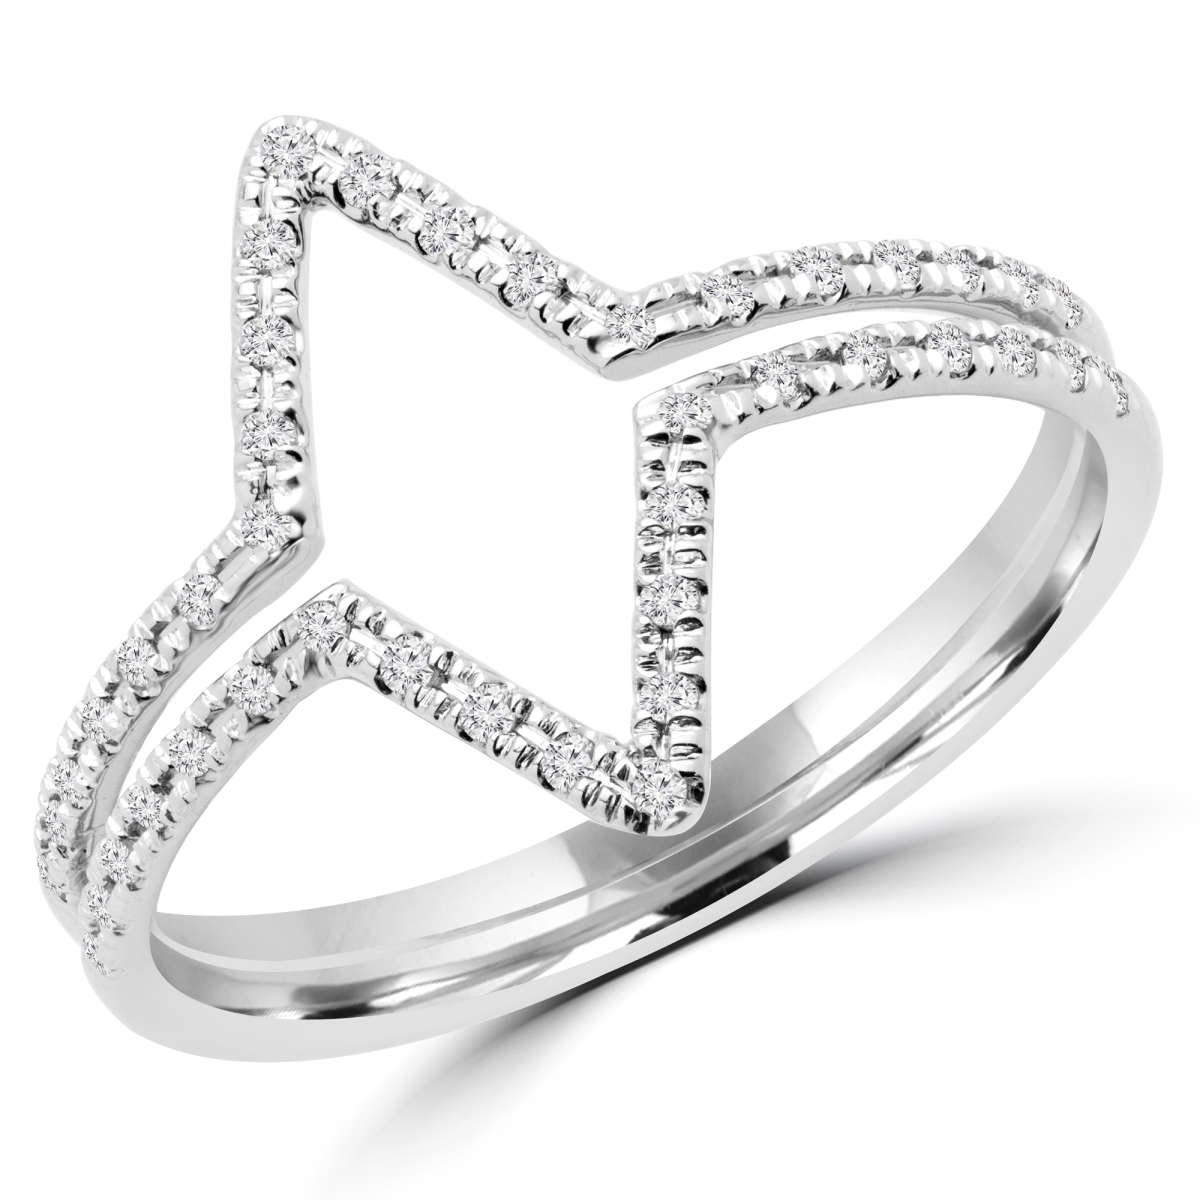 Picture of Majesty Diamonds MDR170058-3.25 0.13 CTW Round Diamond Cocktail Ring in 14K White Gold - Size 3.25